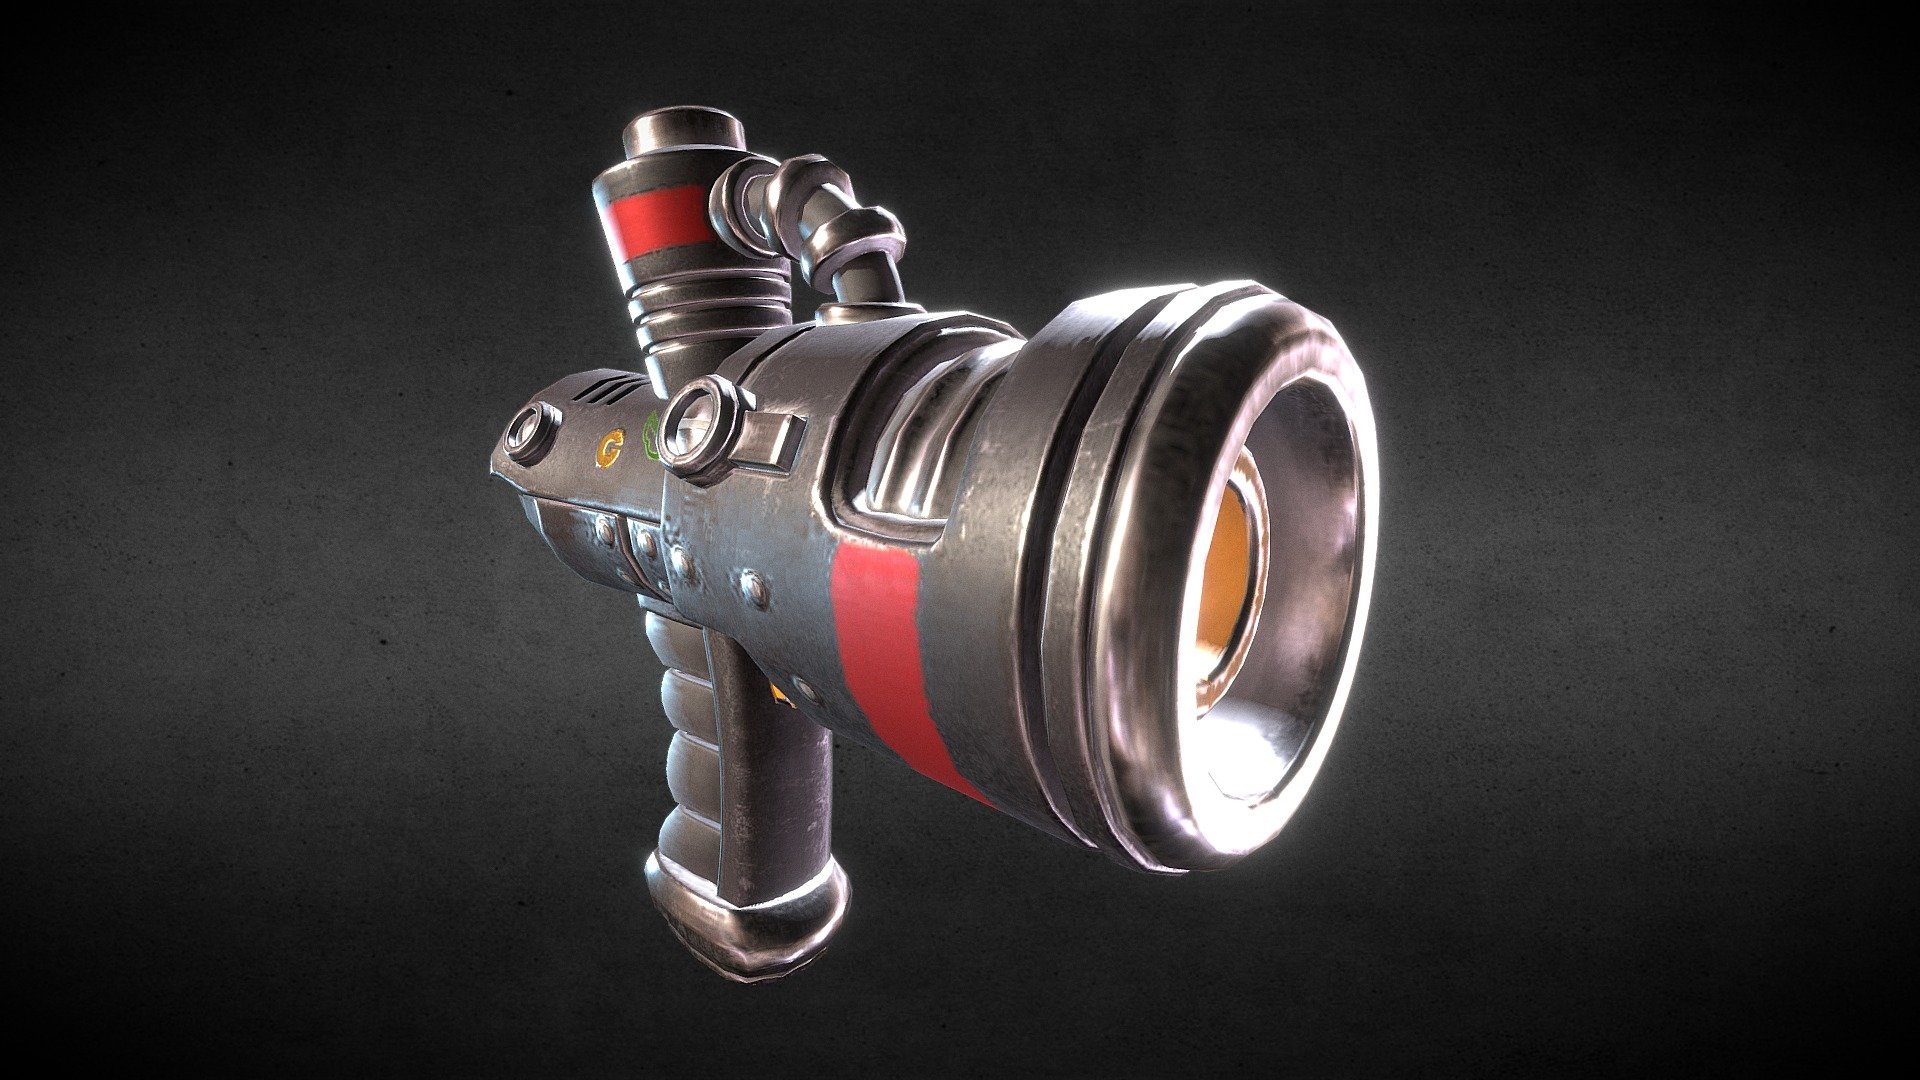 The original Blaster isn't in the Ratchet remake, so I decided to model my own ;) First time using Substance Painter, such a great program!

Enjoy! - Ratchet and Clank - Blaster Remake - 3D model by gashu-monsata 3d model